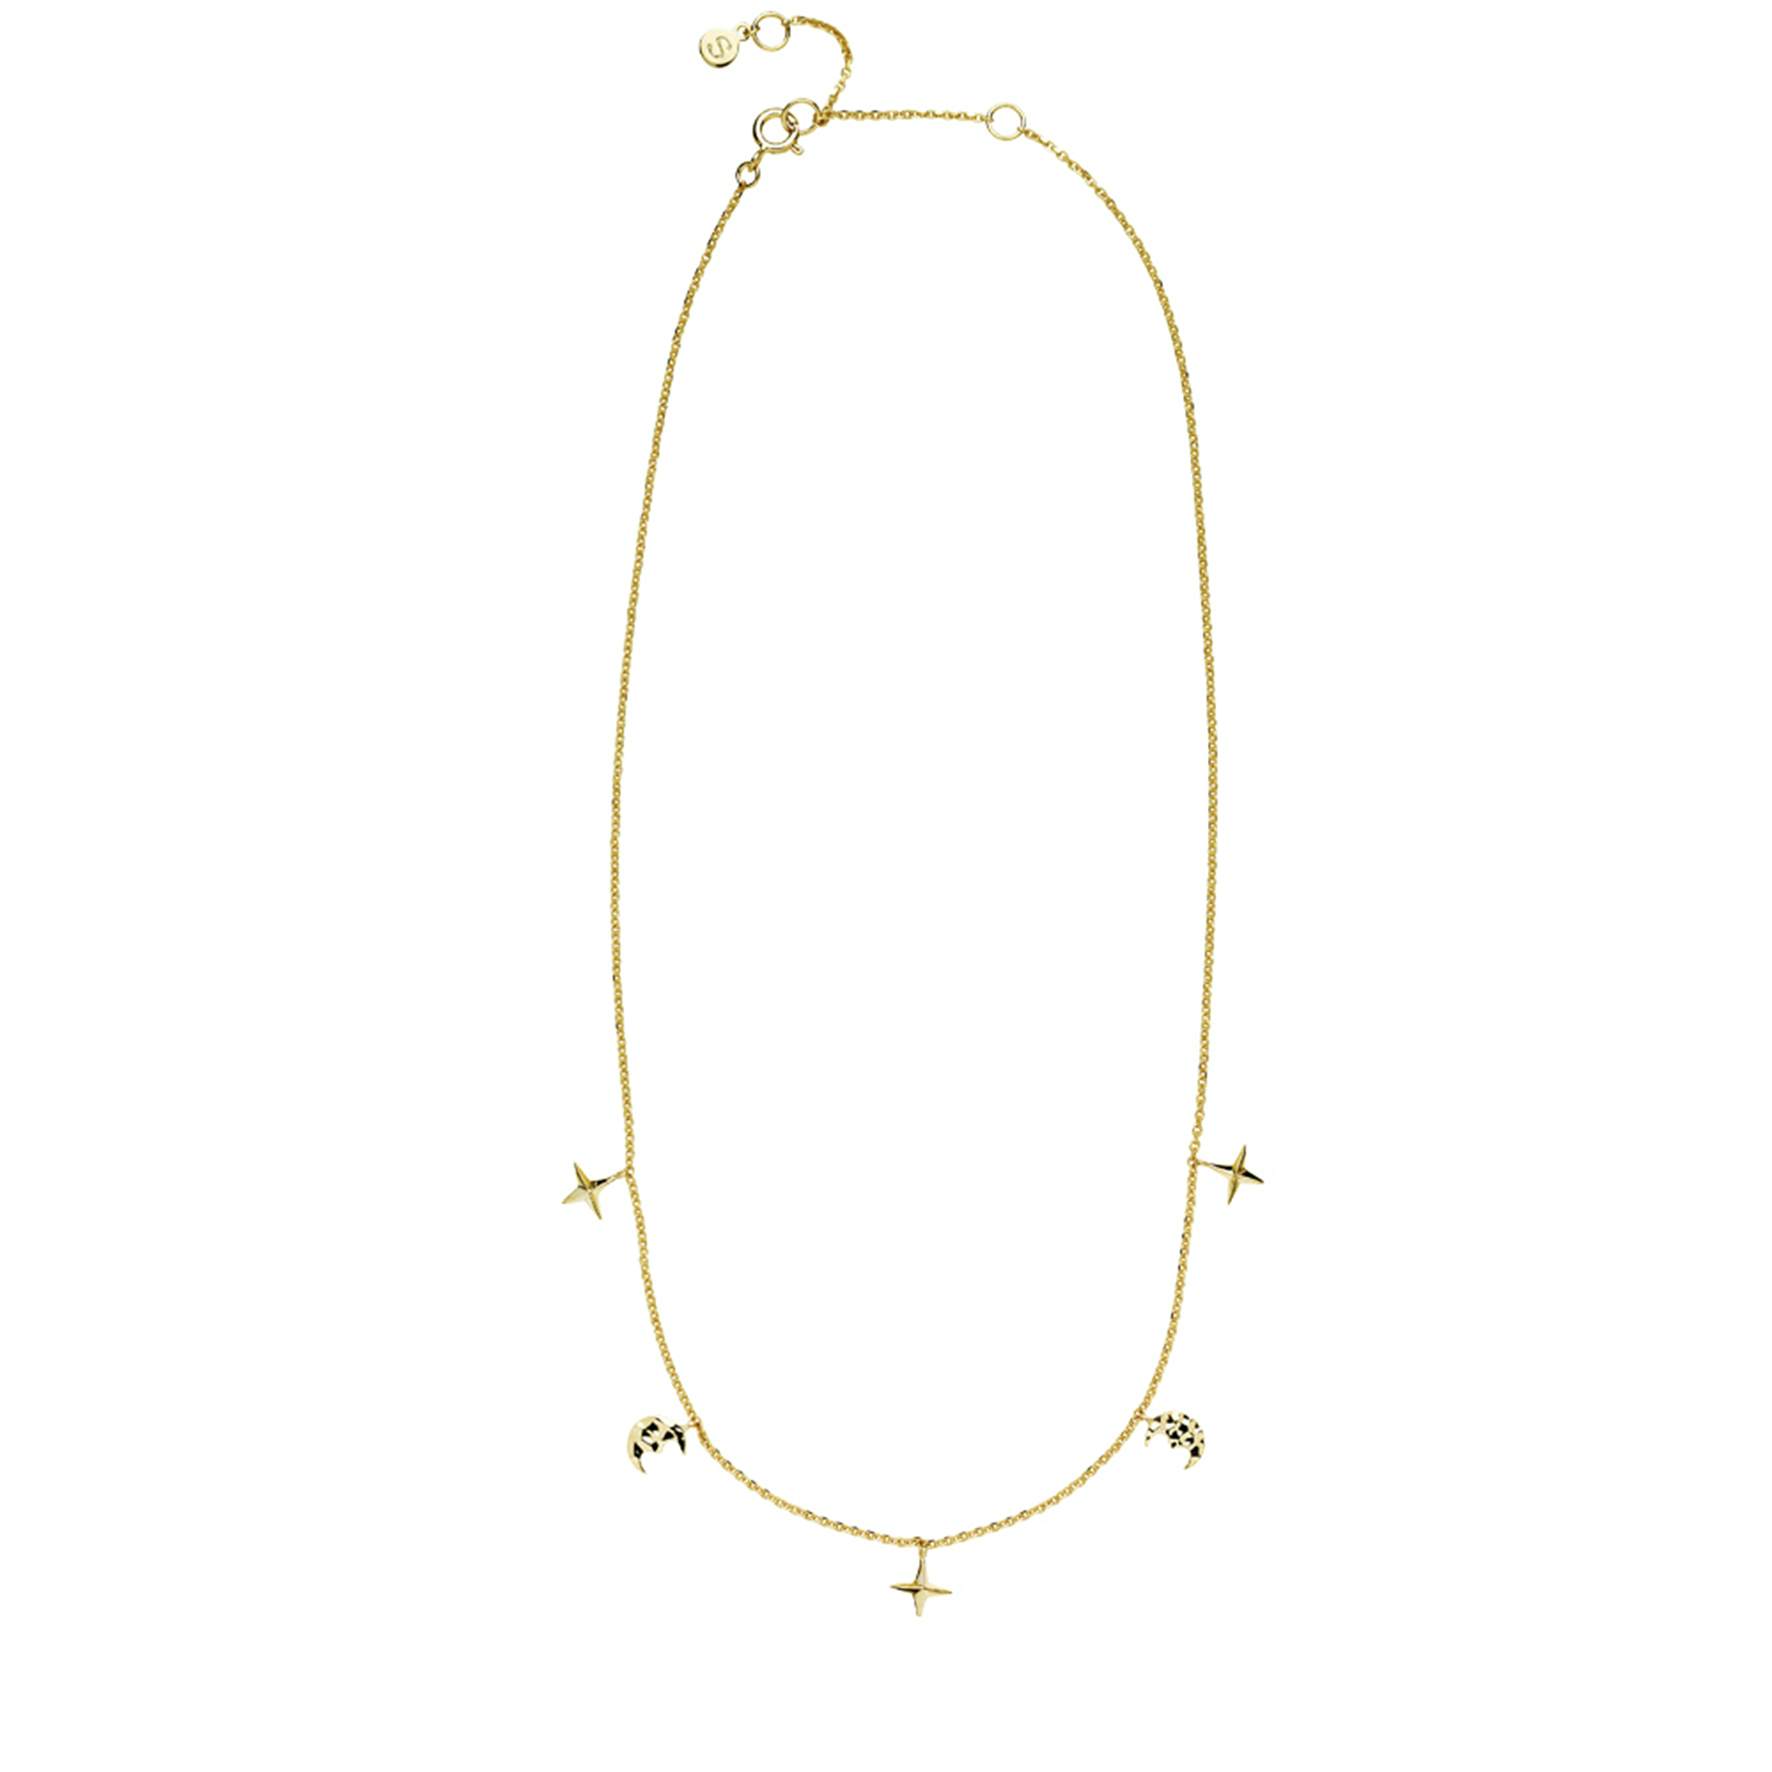 Bella By Sistie Necklace from Sistie in Goldplated-Silver Sterling 925|Blank